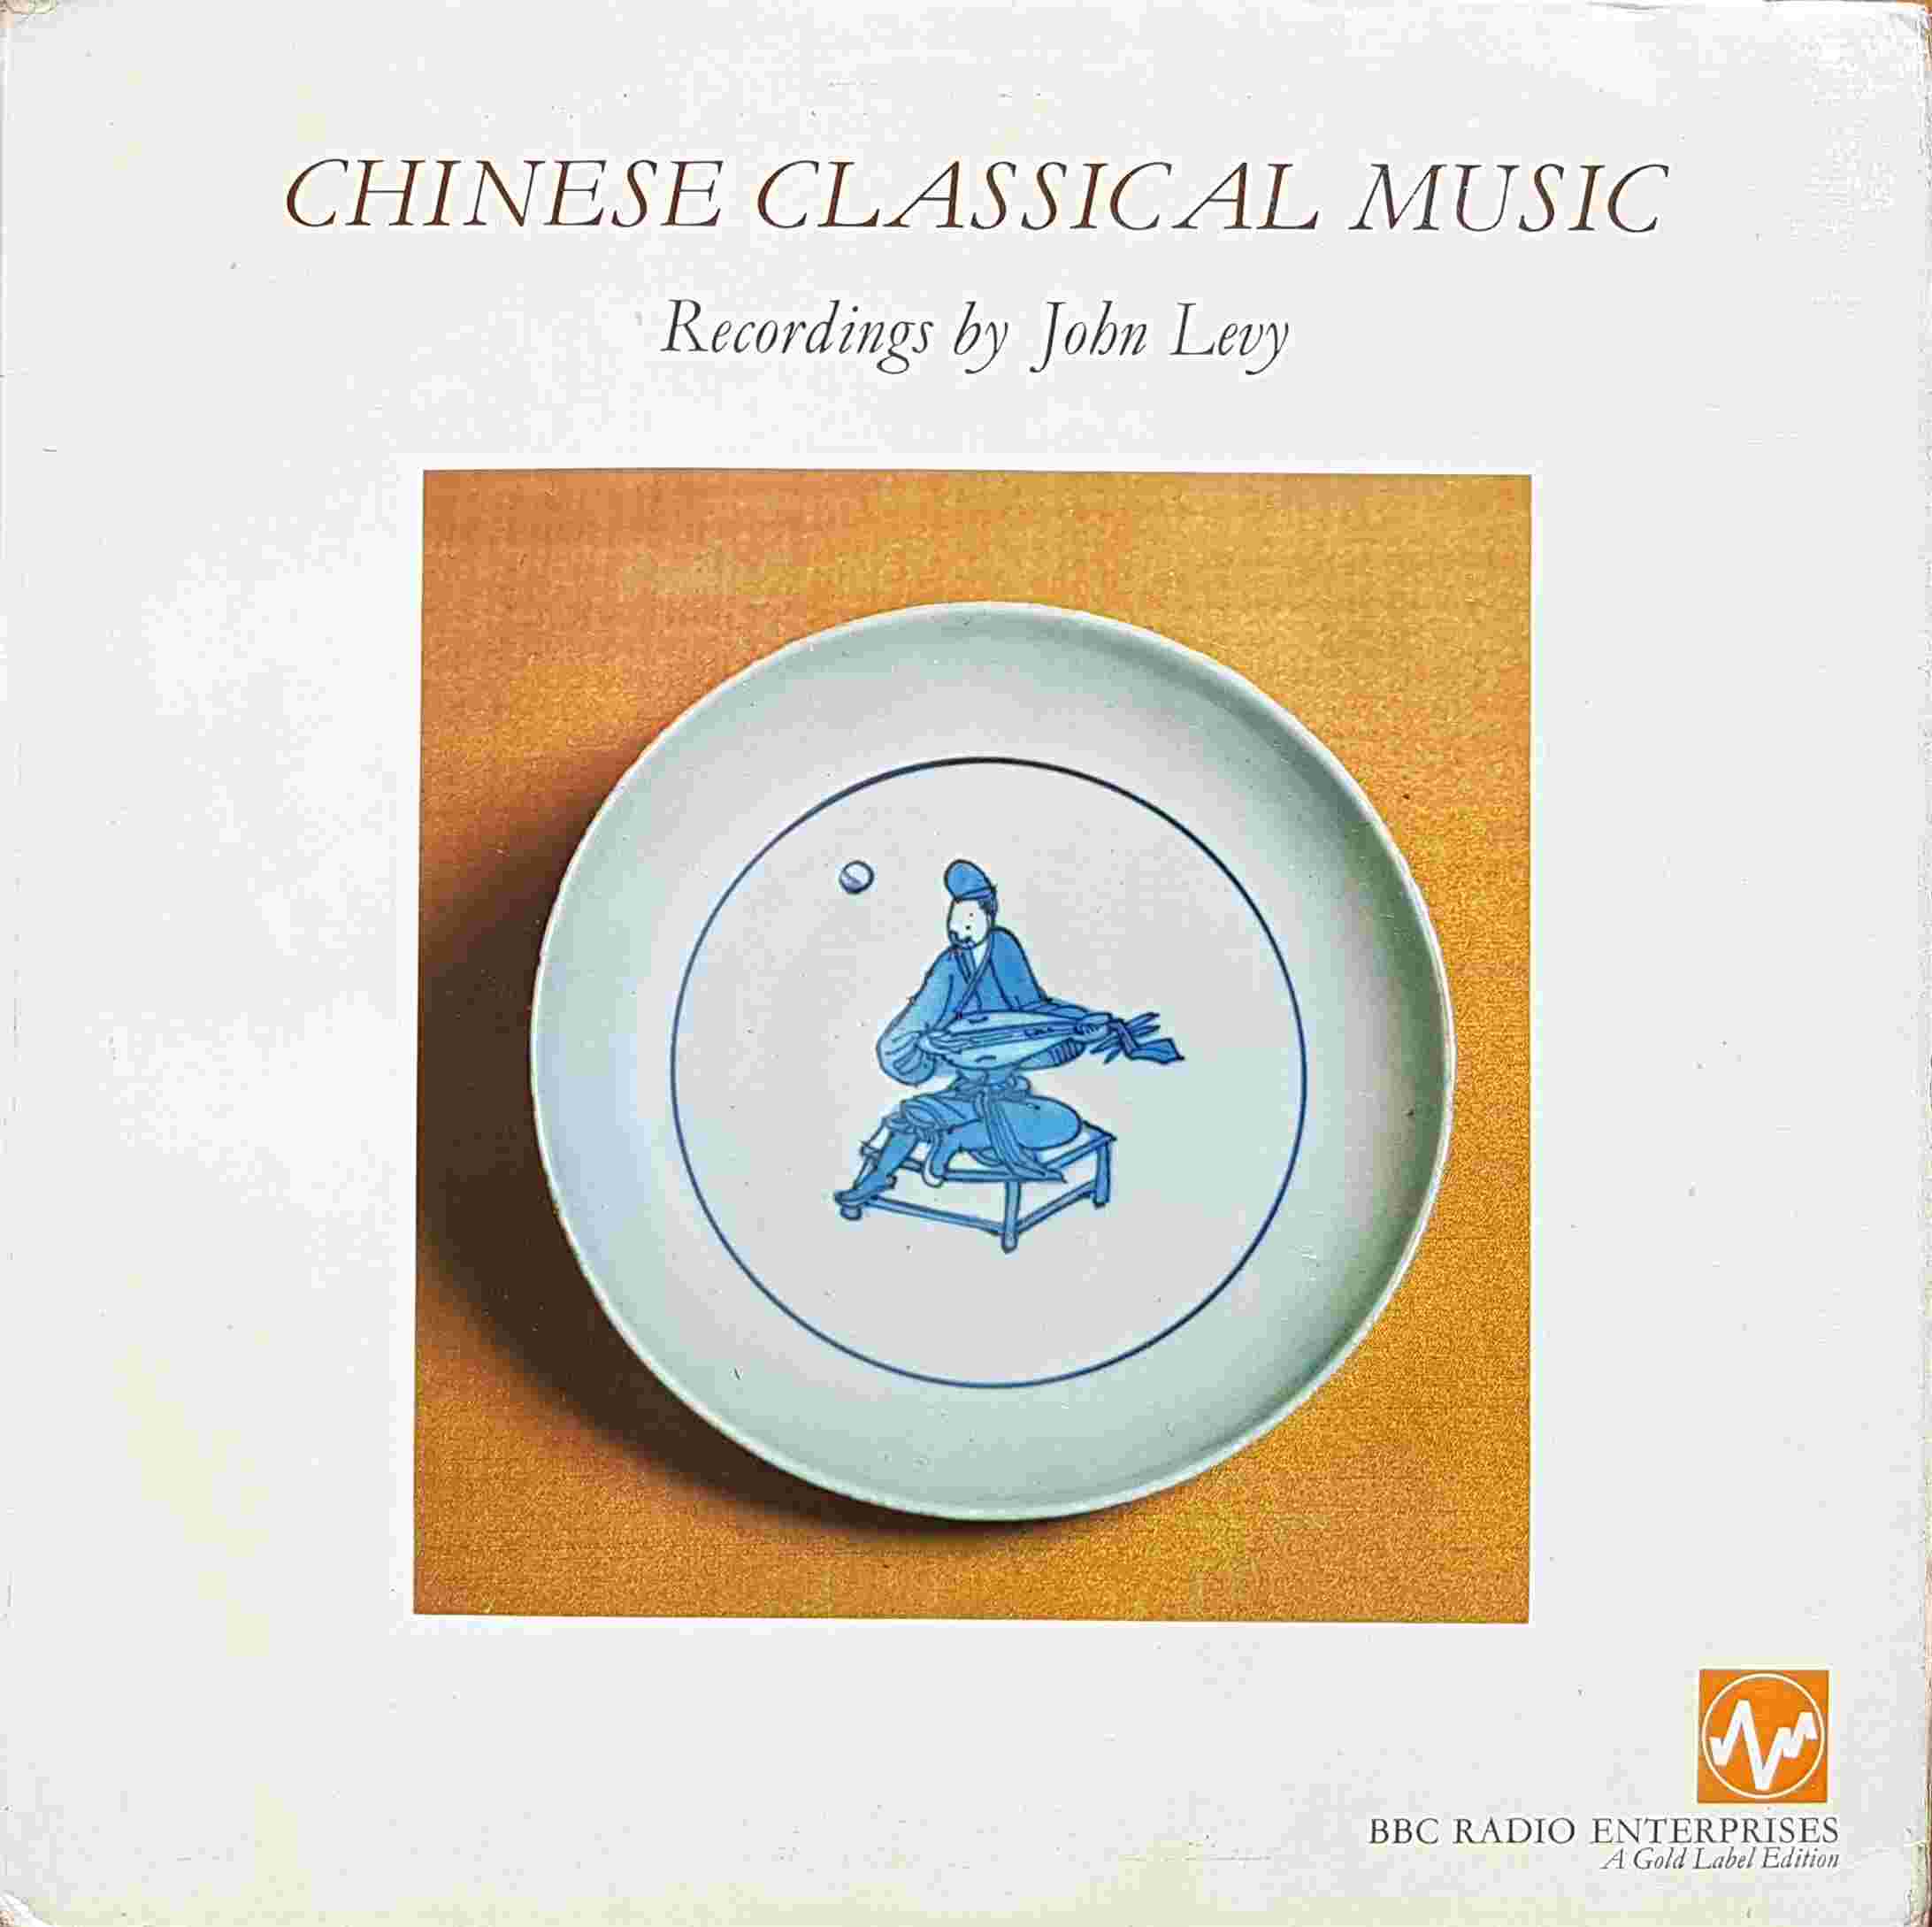 Picture of Chinese classical music by artist Various from the BBC albums - Records and Tapes library